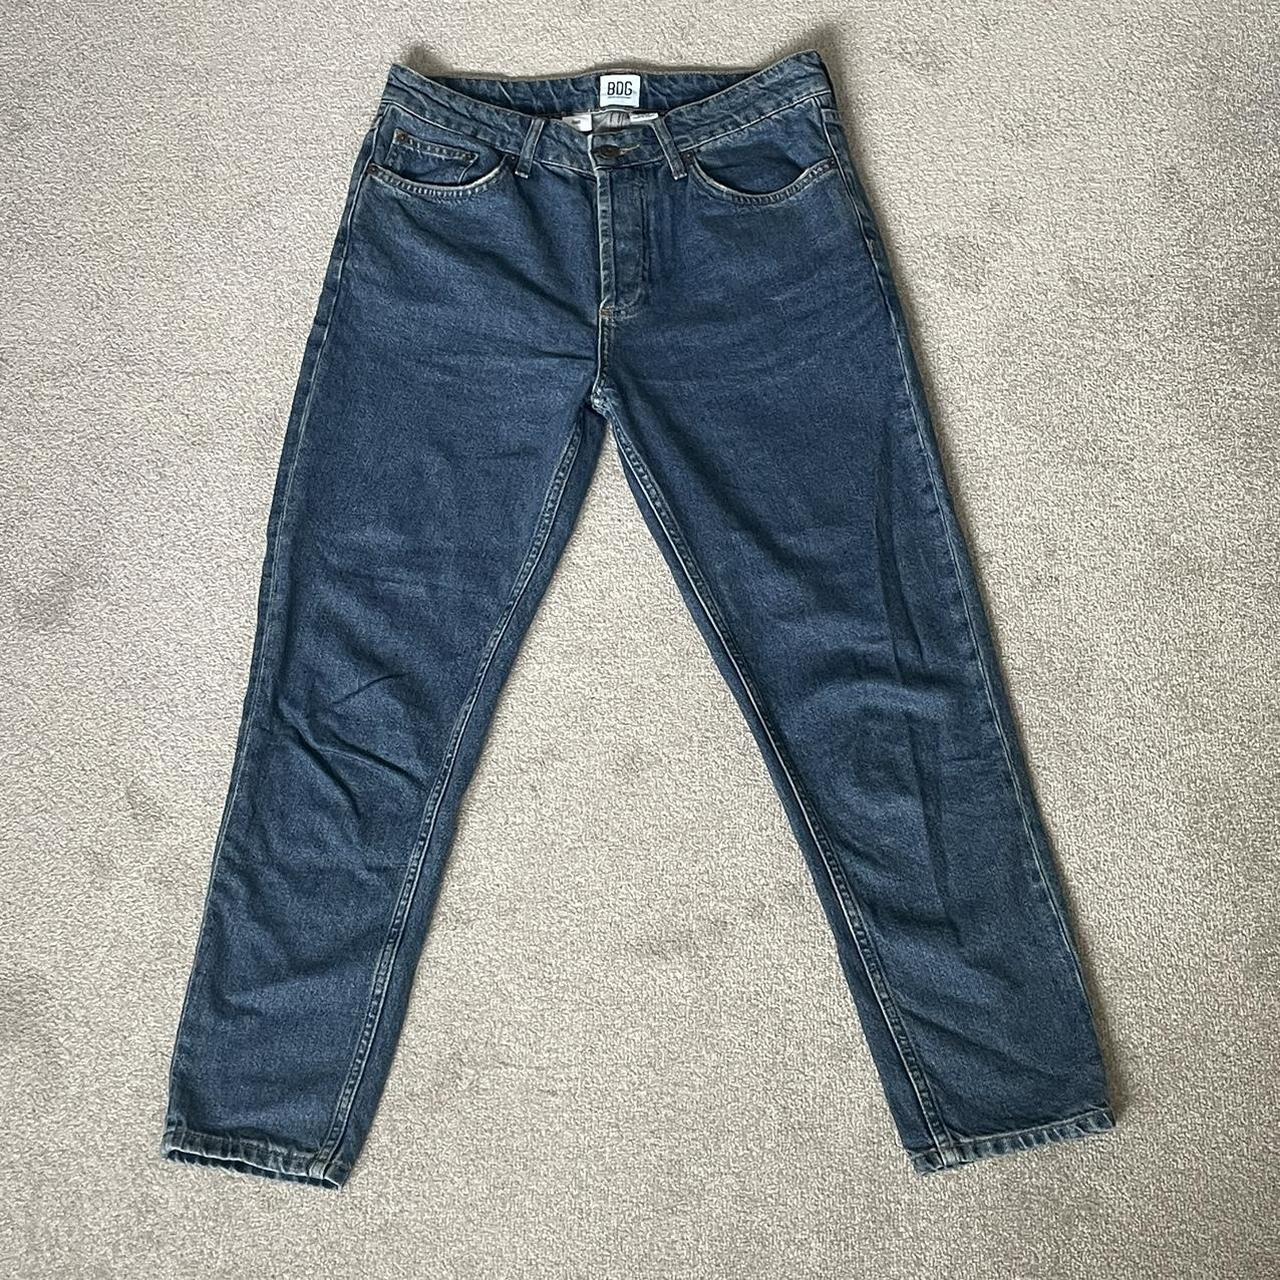 Blue Dad Jeans - BDG from Urban Outfitters. 30 L, 30 W. - Depop